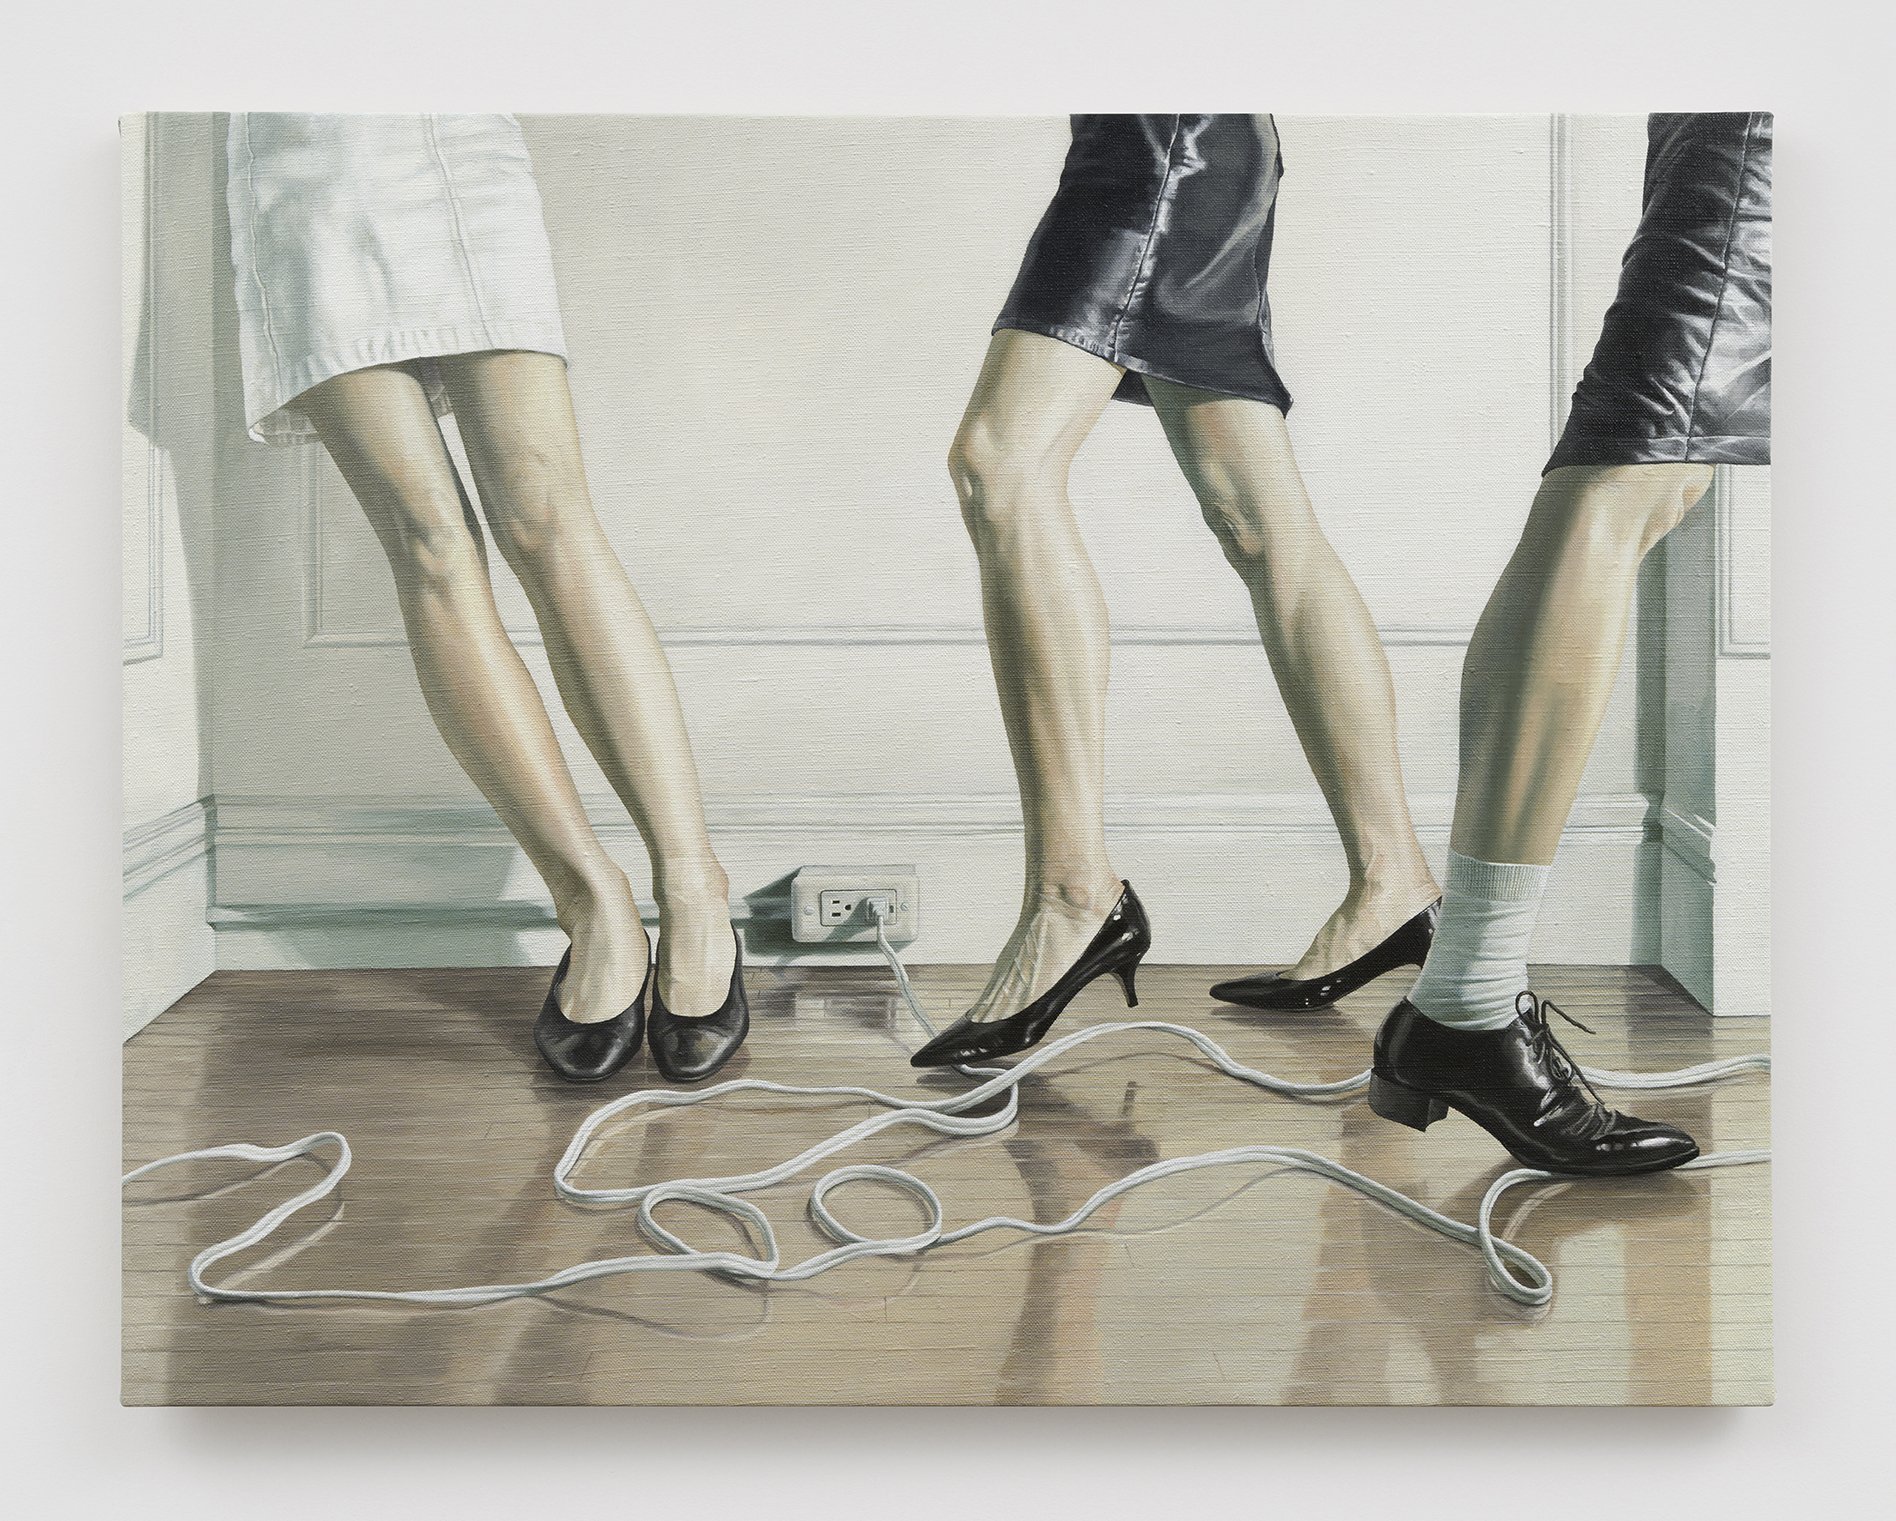   Extension Cord,  2023. Oil on linen. 22 x 28 inches. 